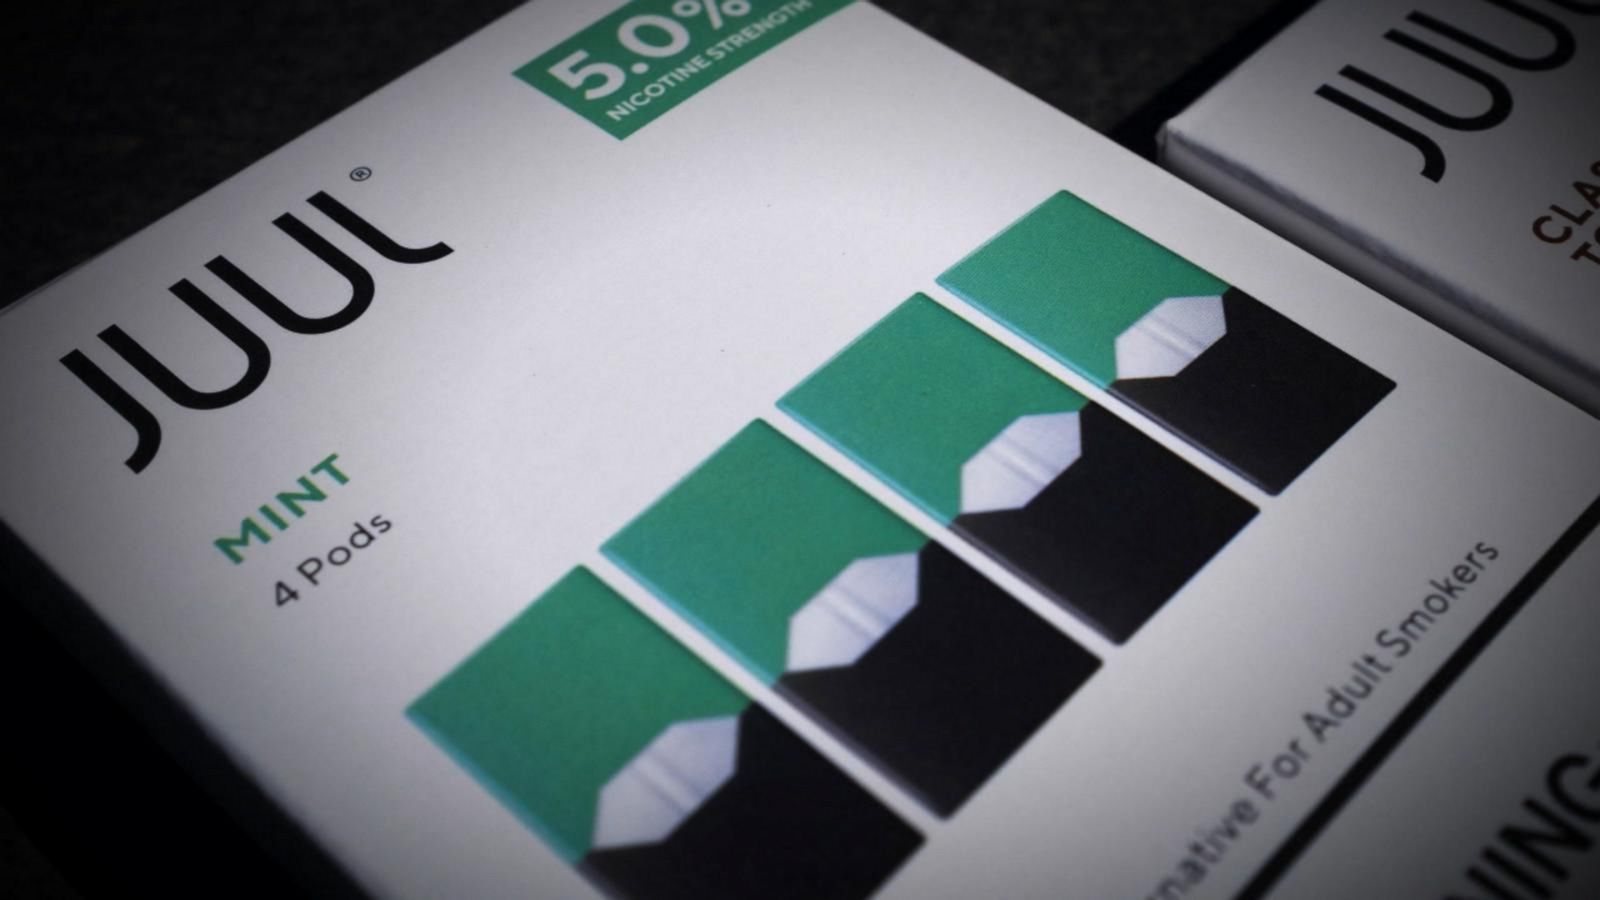 VIDEO: Juul announces it will stop selling mint-flavored pods